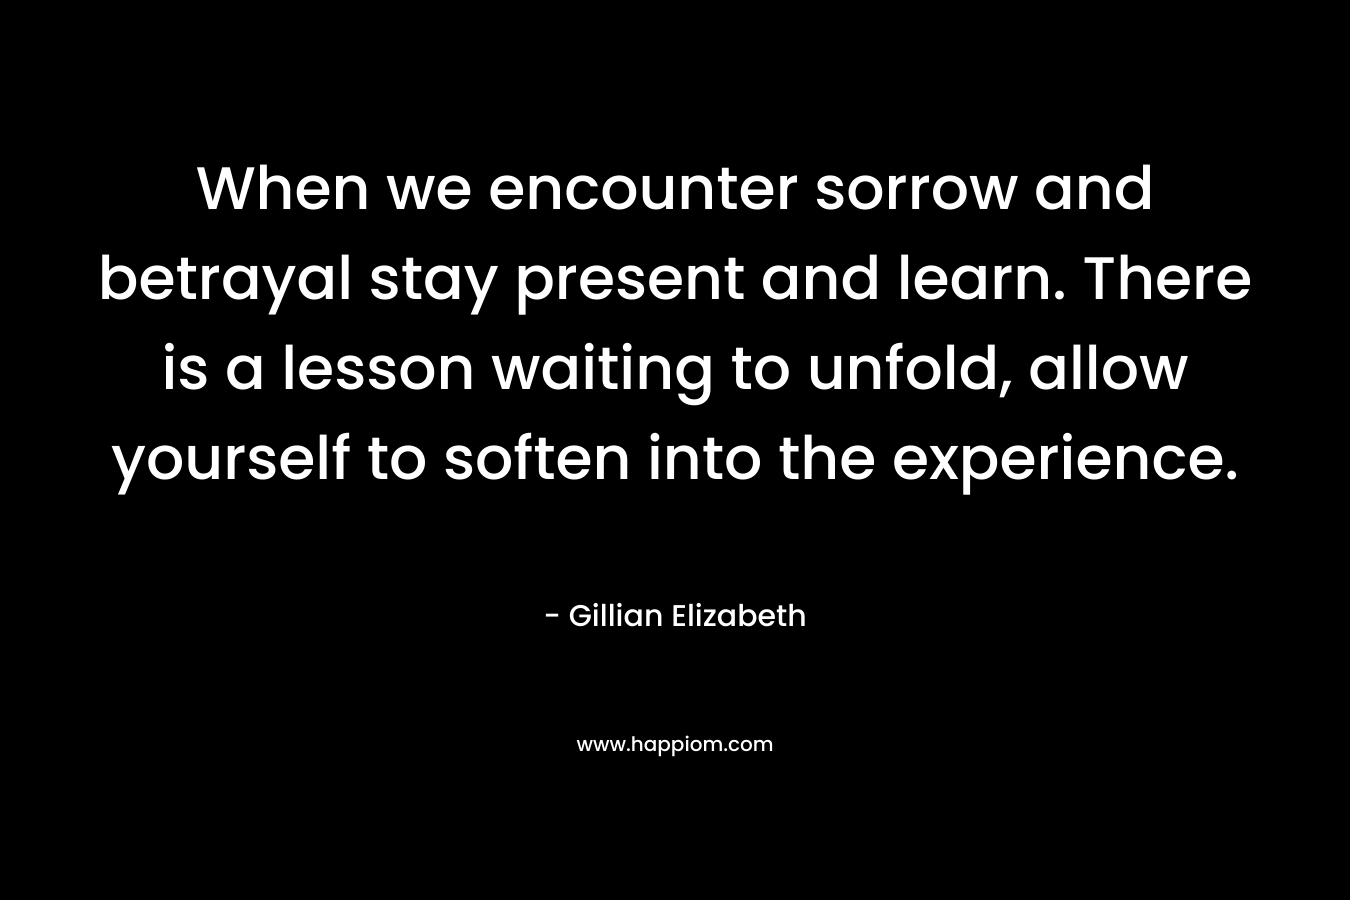 When we encounter sorrow and betrayal stay present and learn. There is a lesson waiting to unfold, allow yourself to soften into the experience.